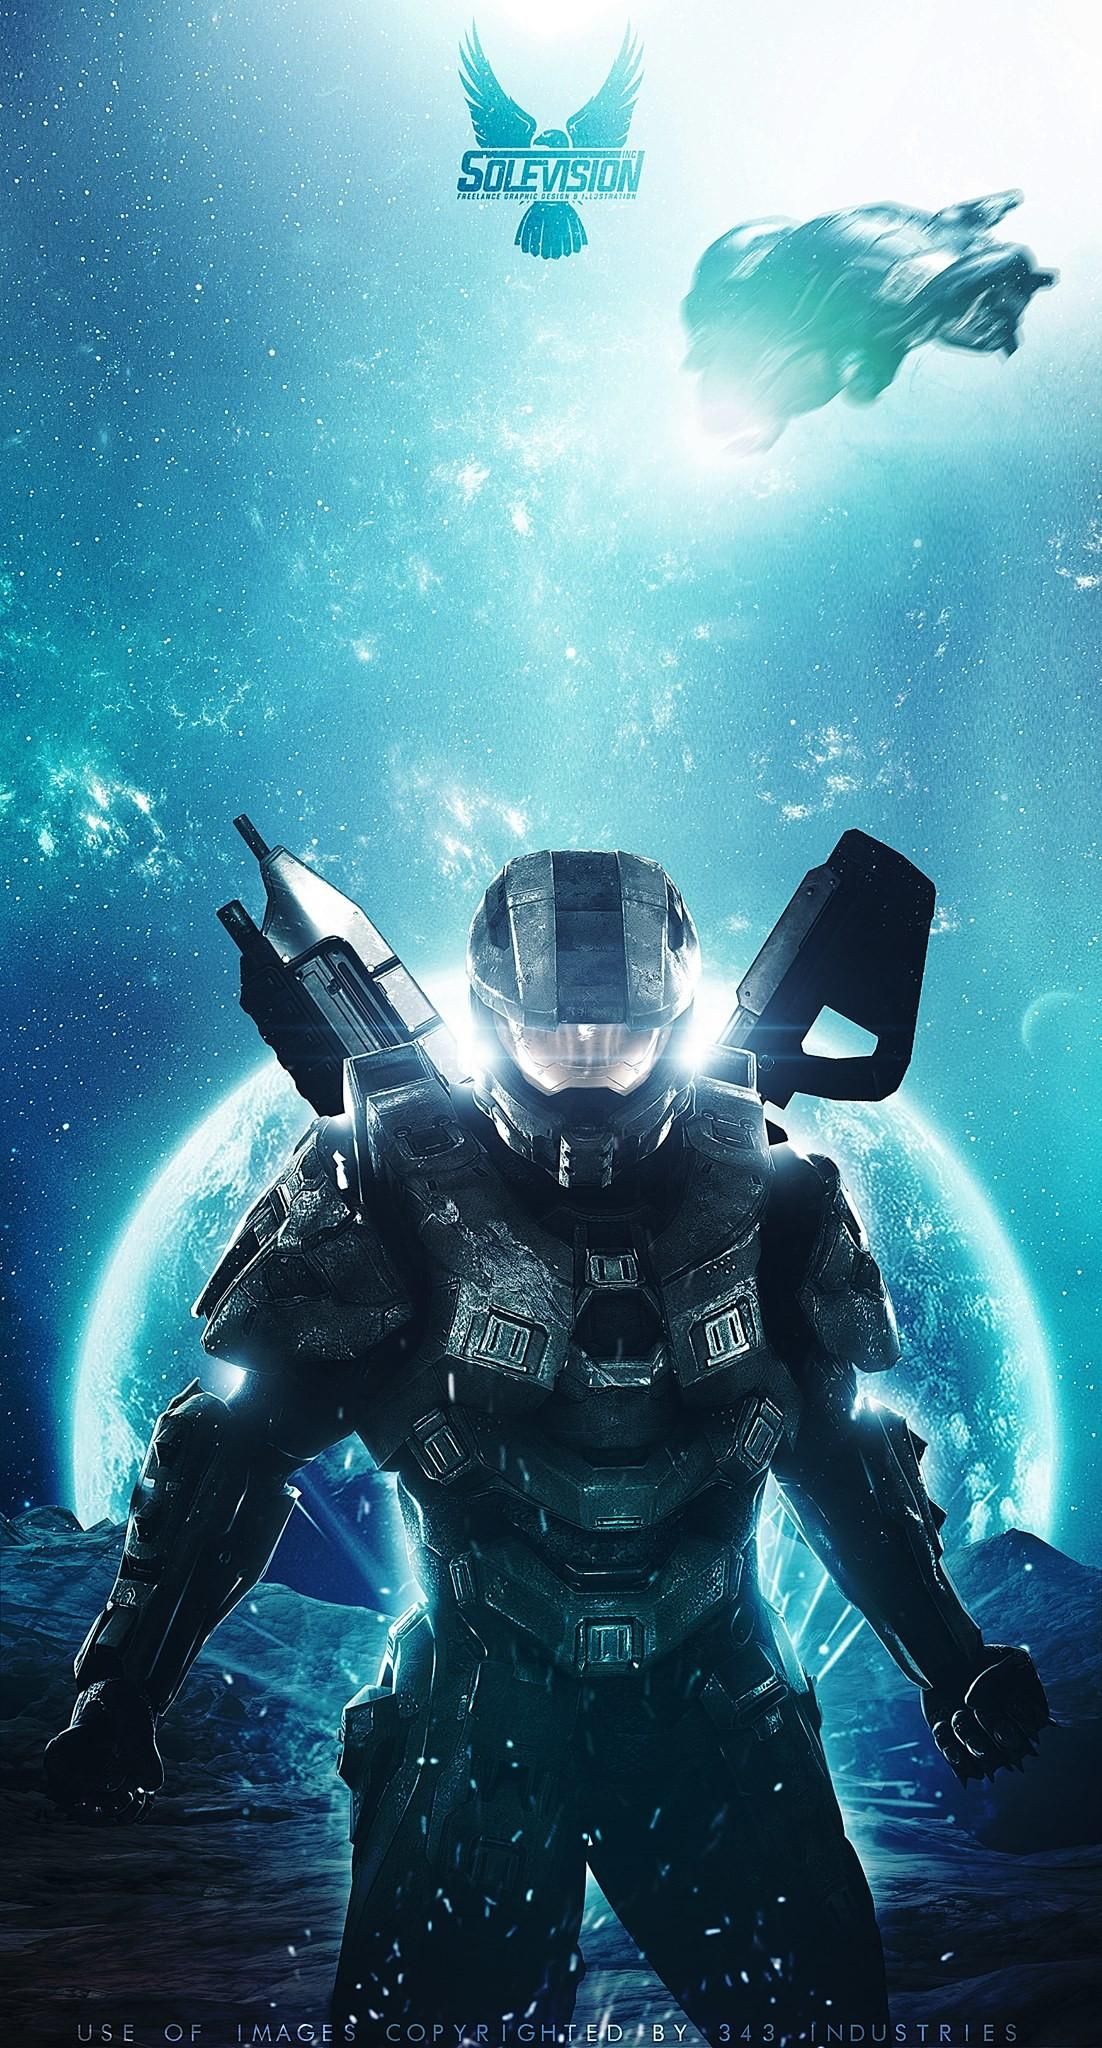 Upcoming Games 2021. Gaming wallpaper, Halo background, Halo armor